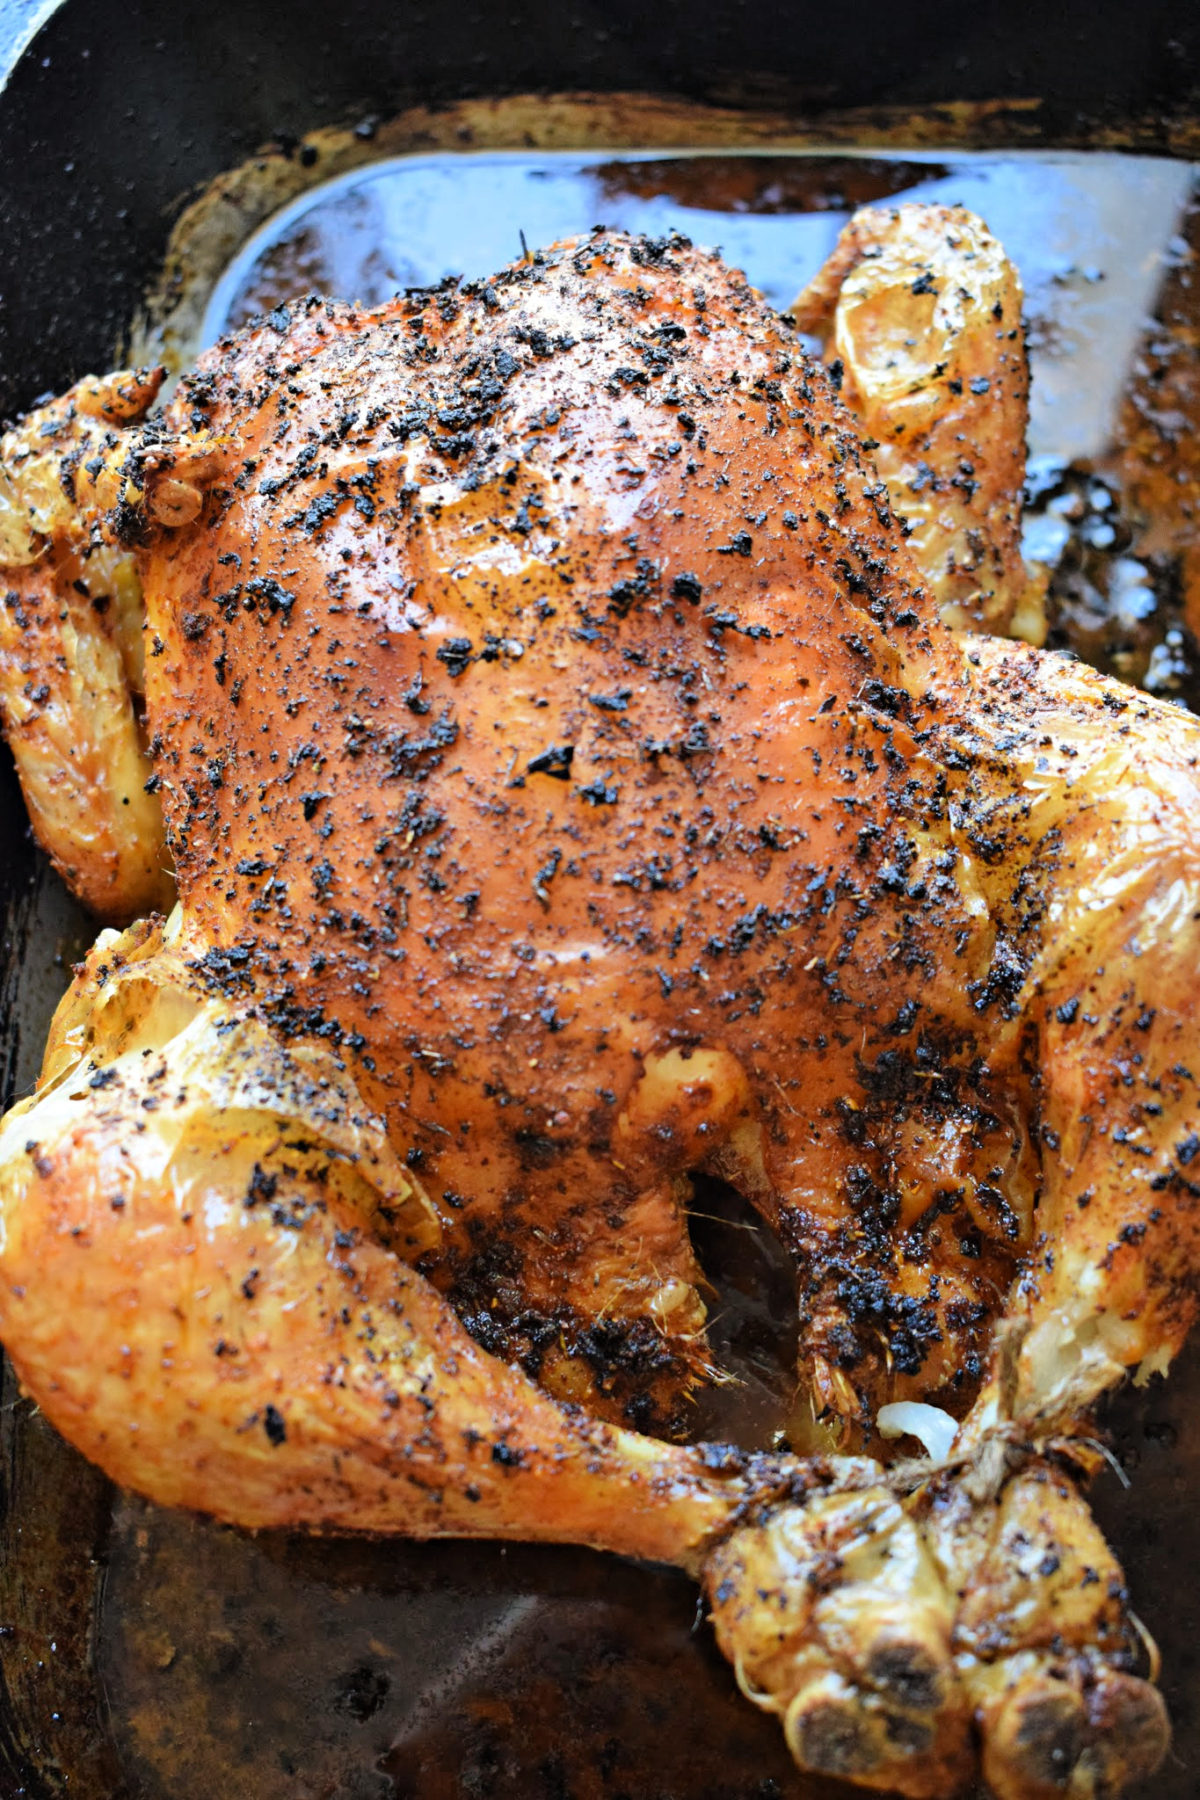 Roasted spiced rubbed chicken